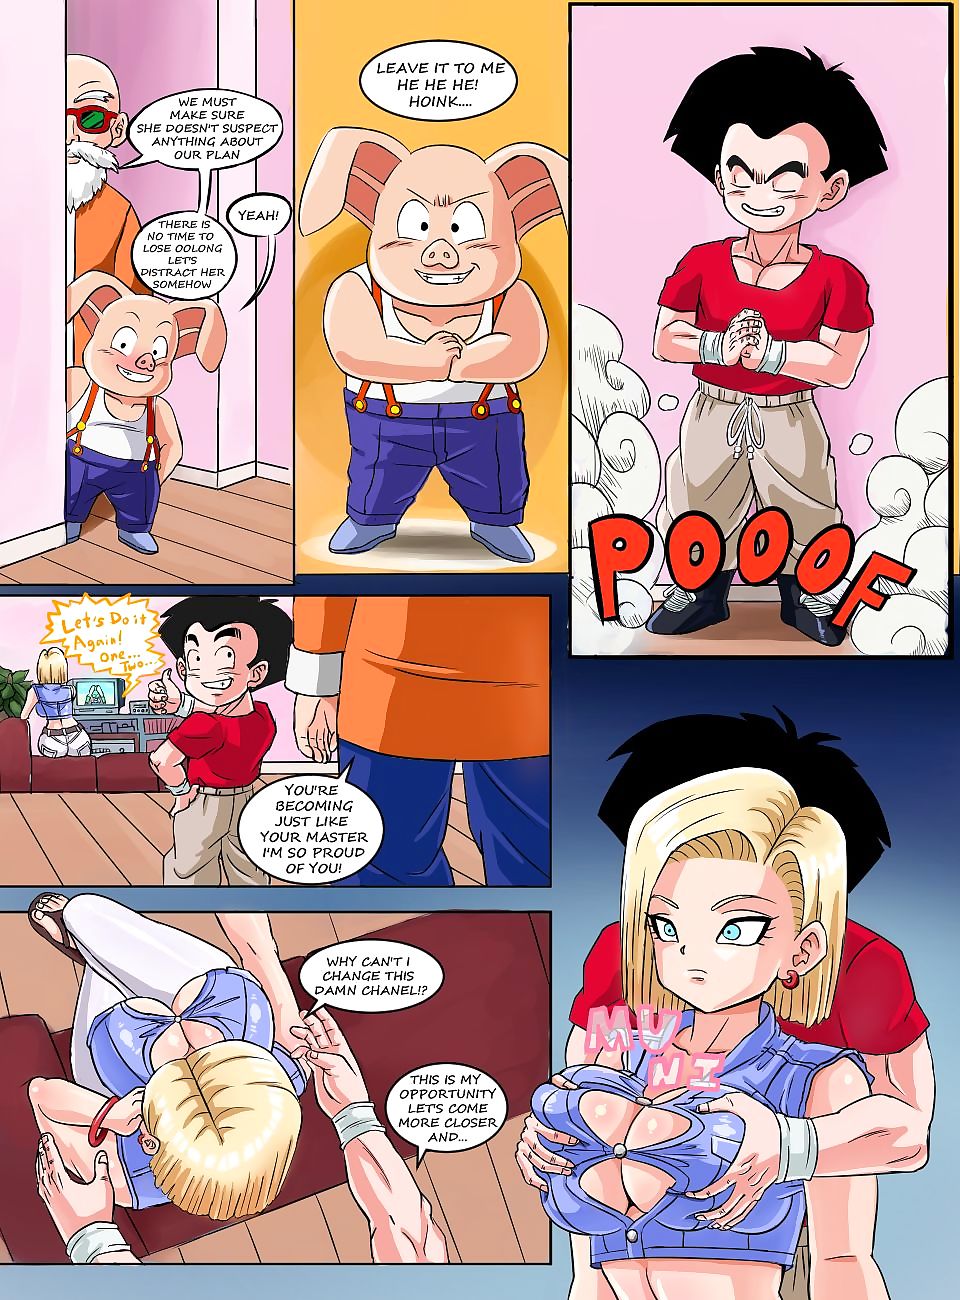 dragon ball Z android 18 ist allein – rosa Pawg page 1